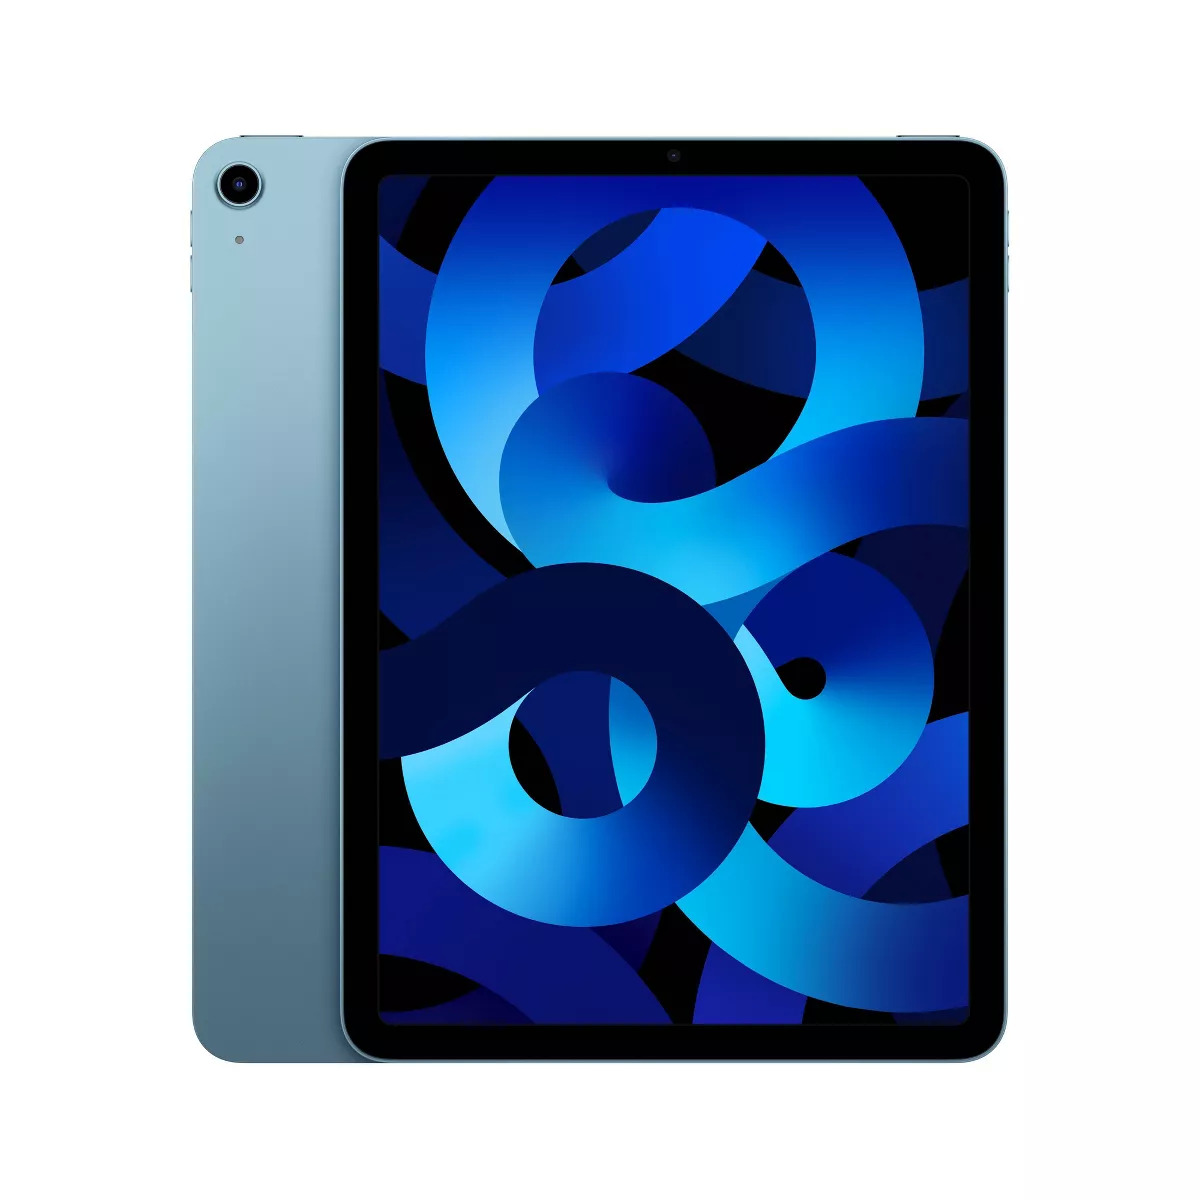 10.9" Apple iPad Air Wi-Fi Tablet (2022, 5th Generation): 256GB (2 colors) $600, 64GB (3 colors) $450 + Free Shipping